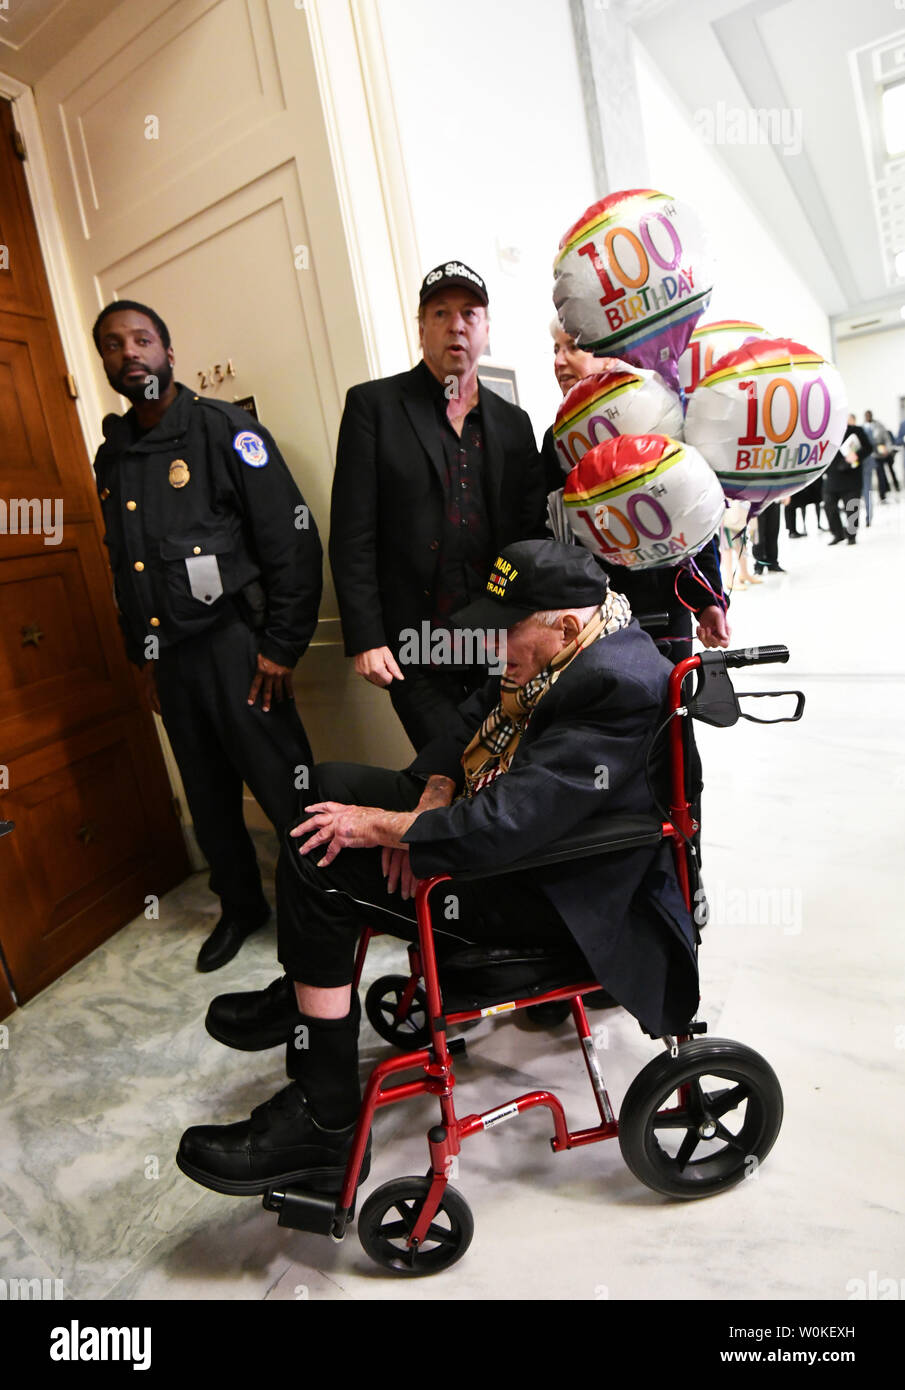 A 100 year old man waits to enter the room where Michael D. Cohen will testify before the House Oversight Committee on February 27, 2019 in Washington DC. Cohen, once one of President Trump's most trusted aides and lawyers, took the witness stand for his first and only public appearance before Congress on Wednesday to discuss the President's personal character and possible criminal conduct.      Photo by Pat Benic/UPI Stock Photo